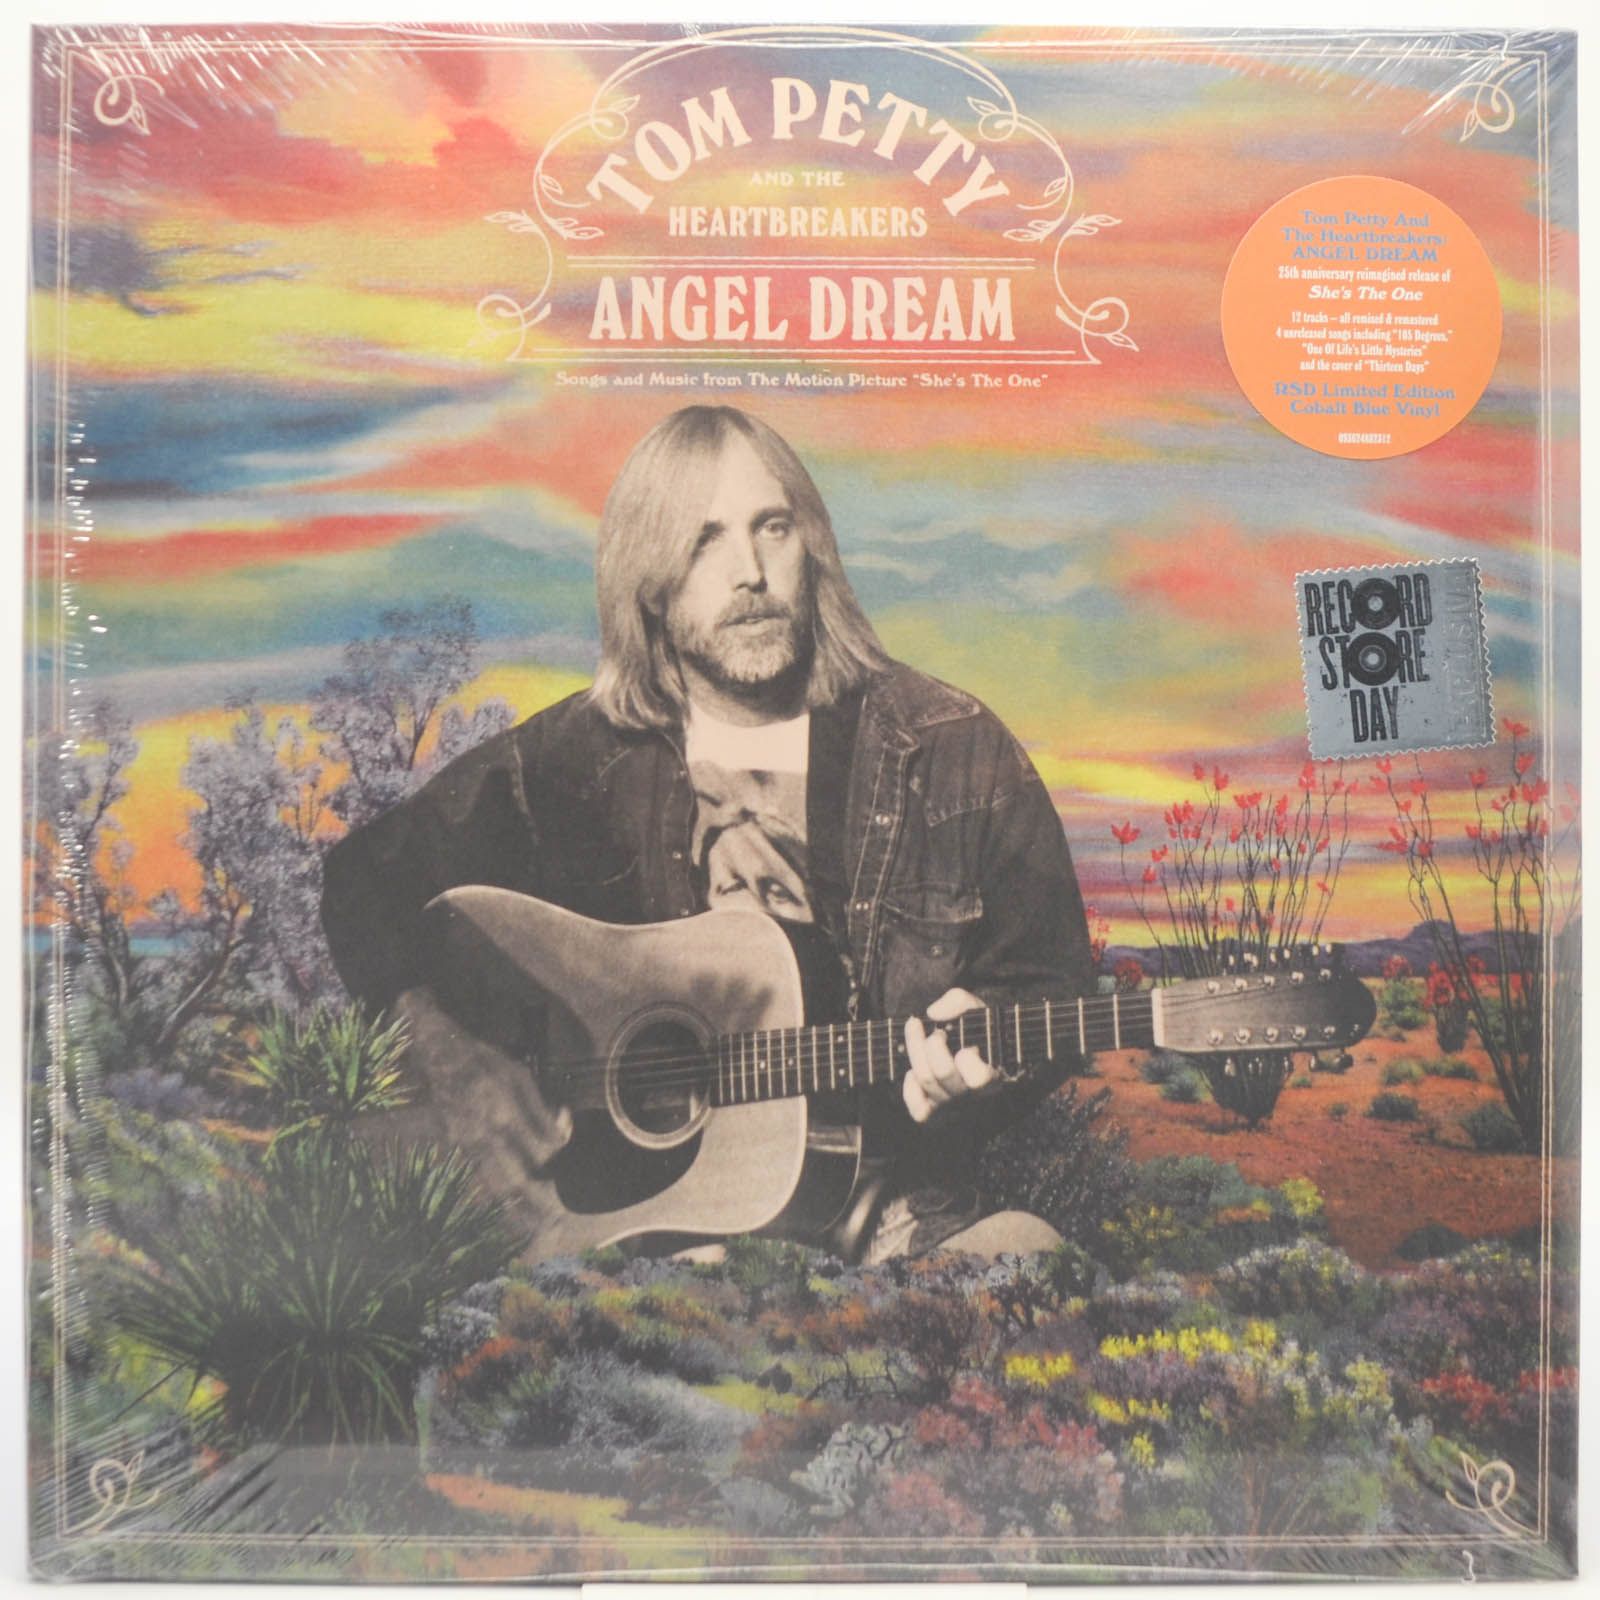 Tom Petty And The Heartbreakers — Angel Dream (Songs And Music From The Motion Picture "She's The One"), 1996